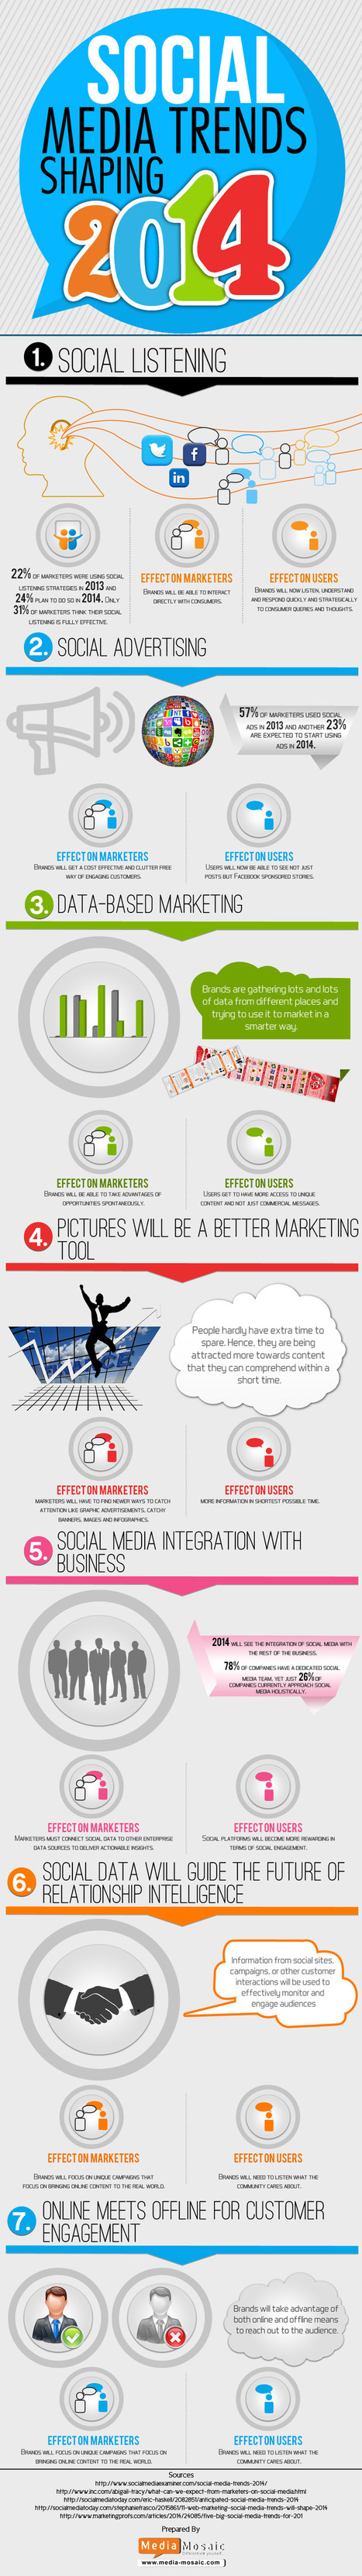 7 Trends Shaping How Brands Use Social Media in 2014 [INFOGRAPHIC] | digital marketing strategy | Scoop.it